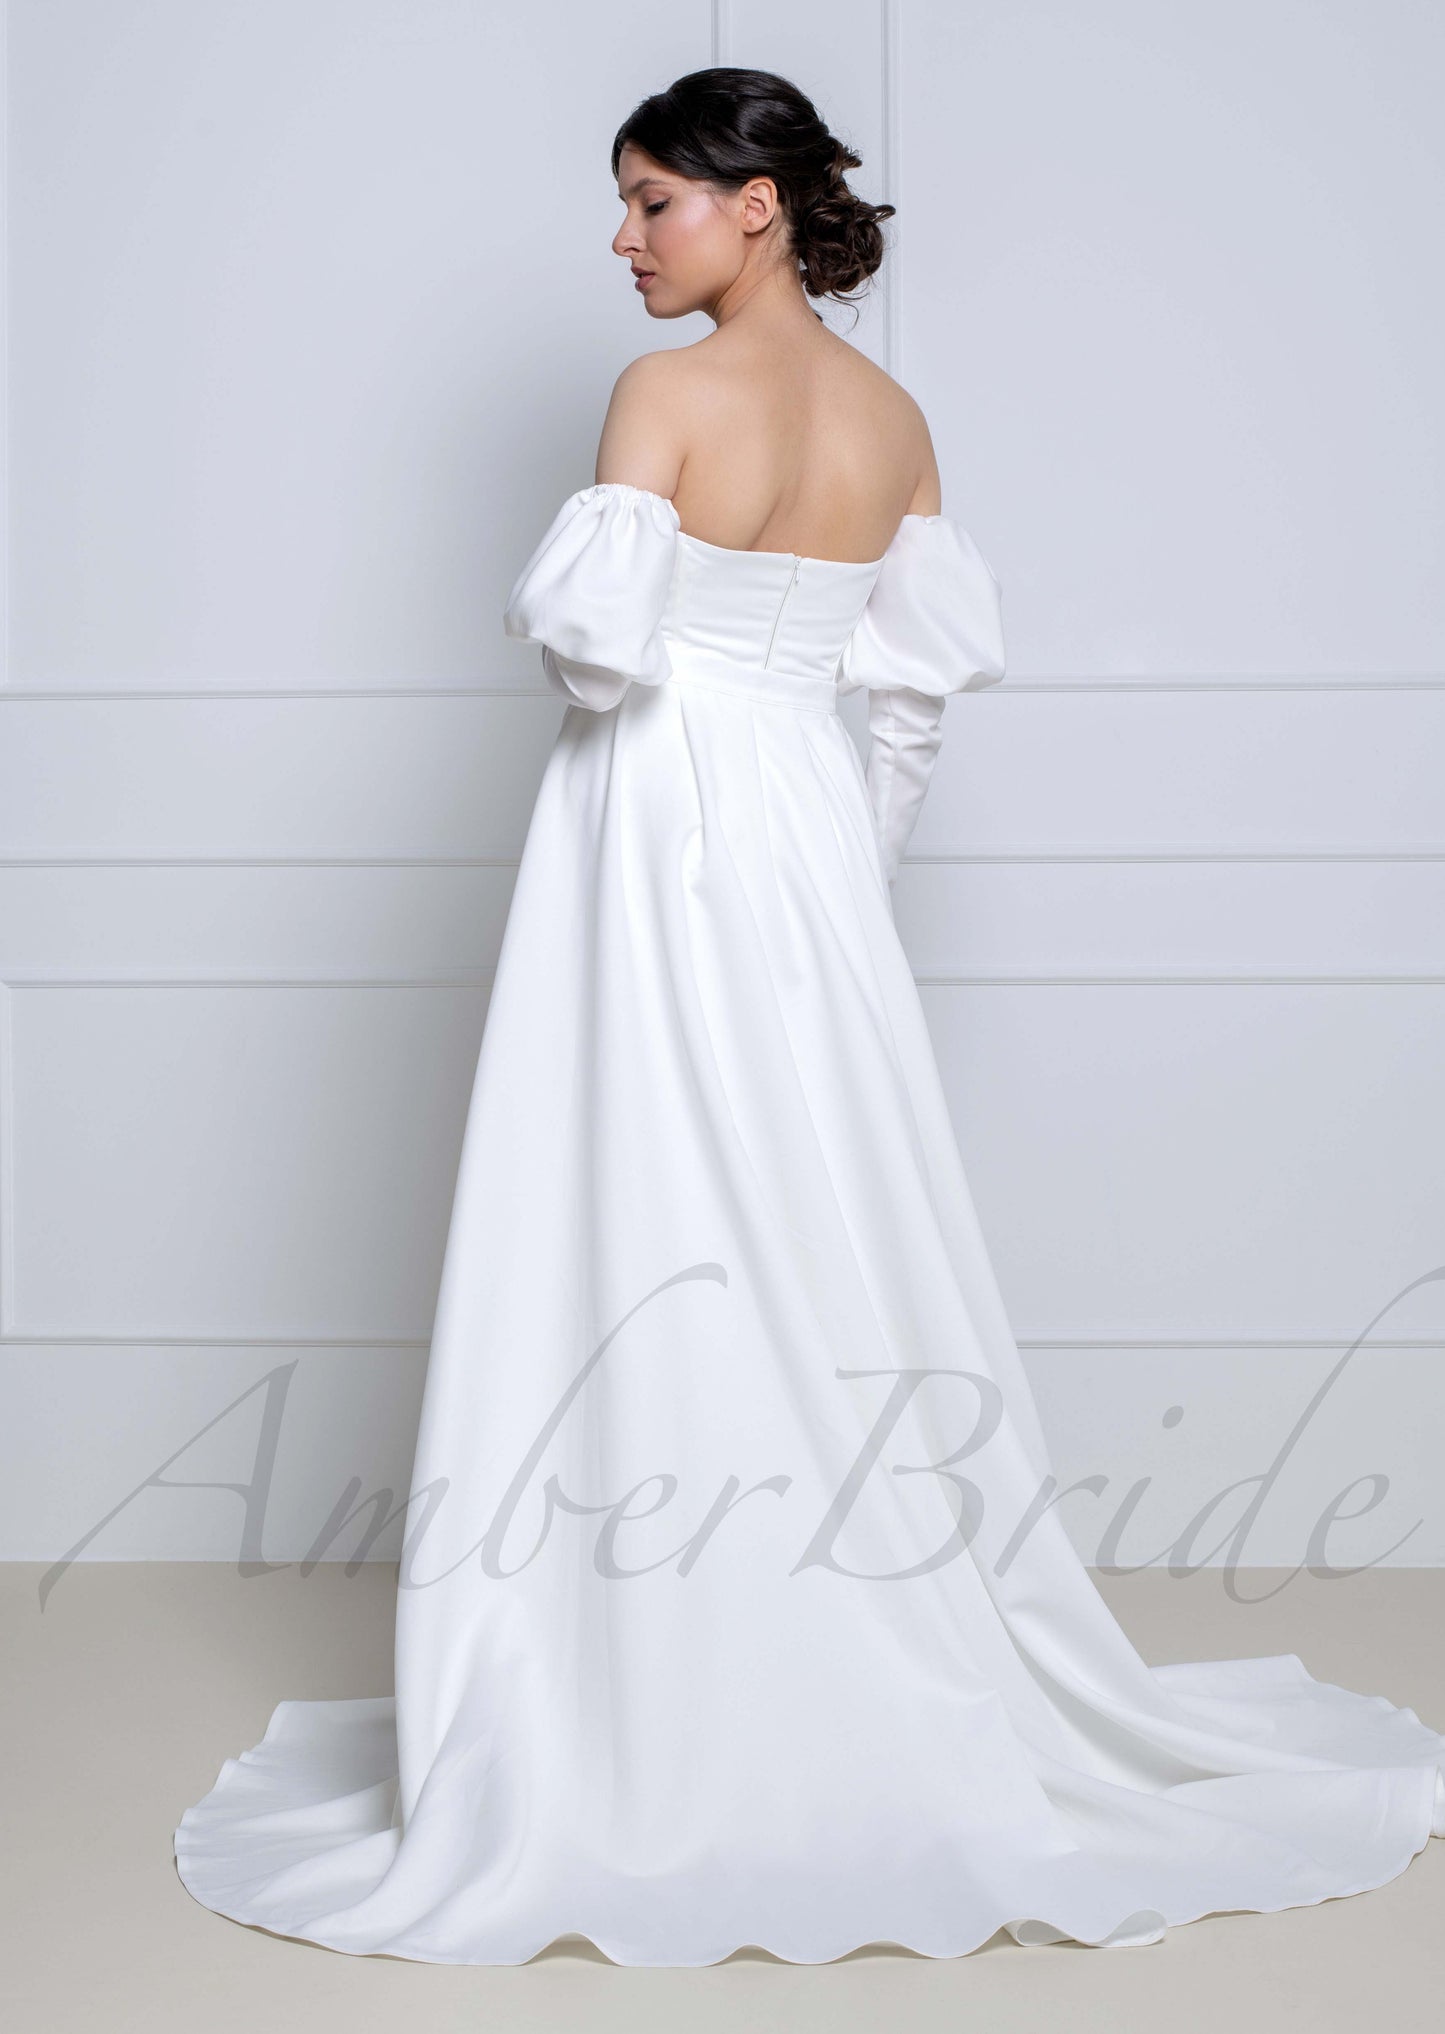 Exquisite Satin Wedding Dress with Overskirt and Detachable Bishop Sleeves